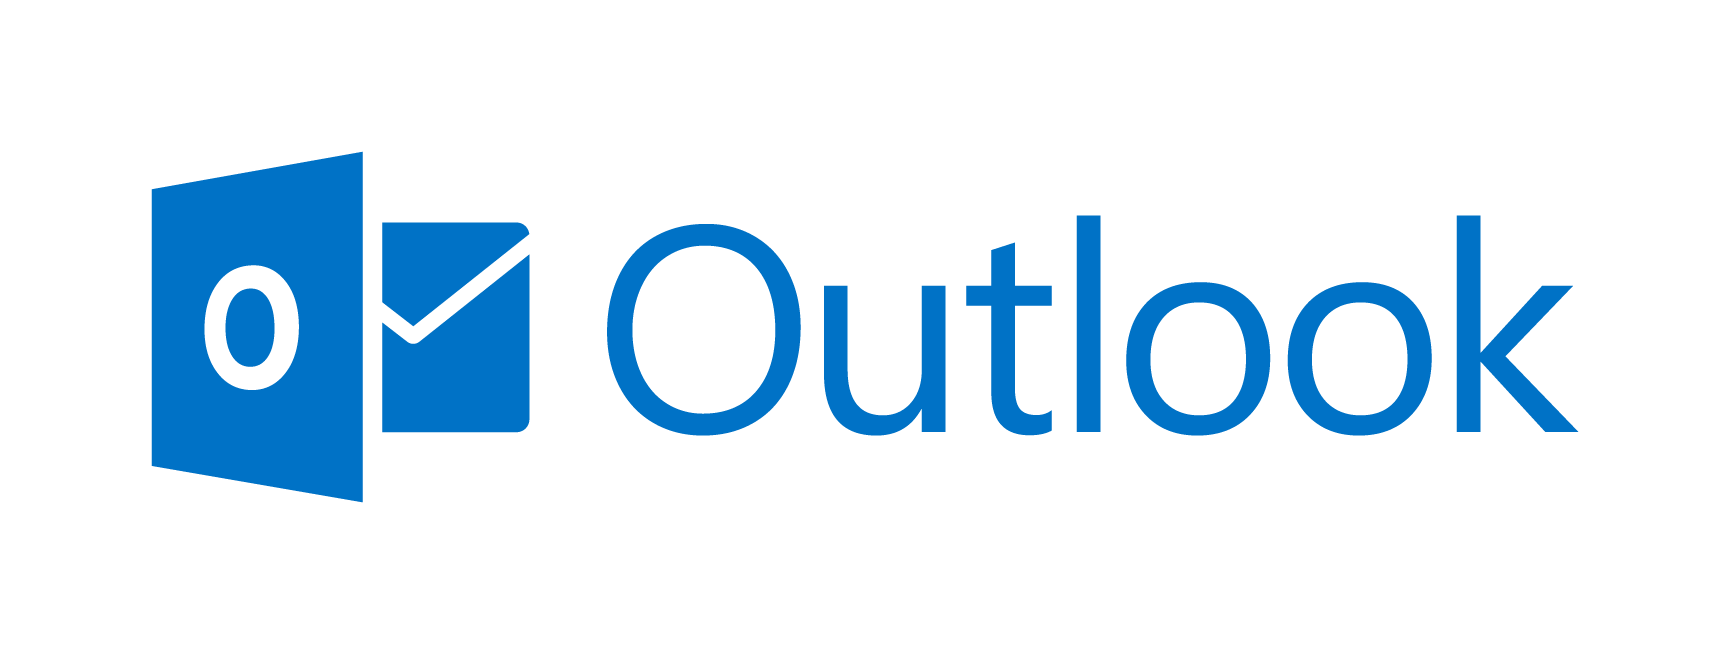 Outlook Calendar Logo - Most requested features are now available for Outlook on iOS and ...